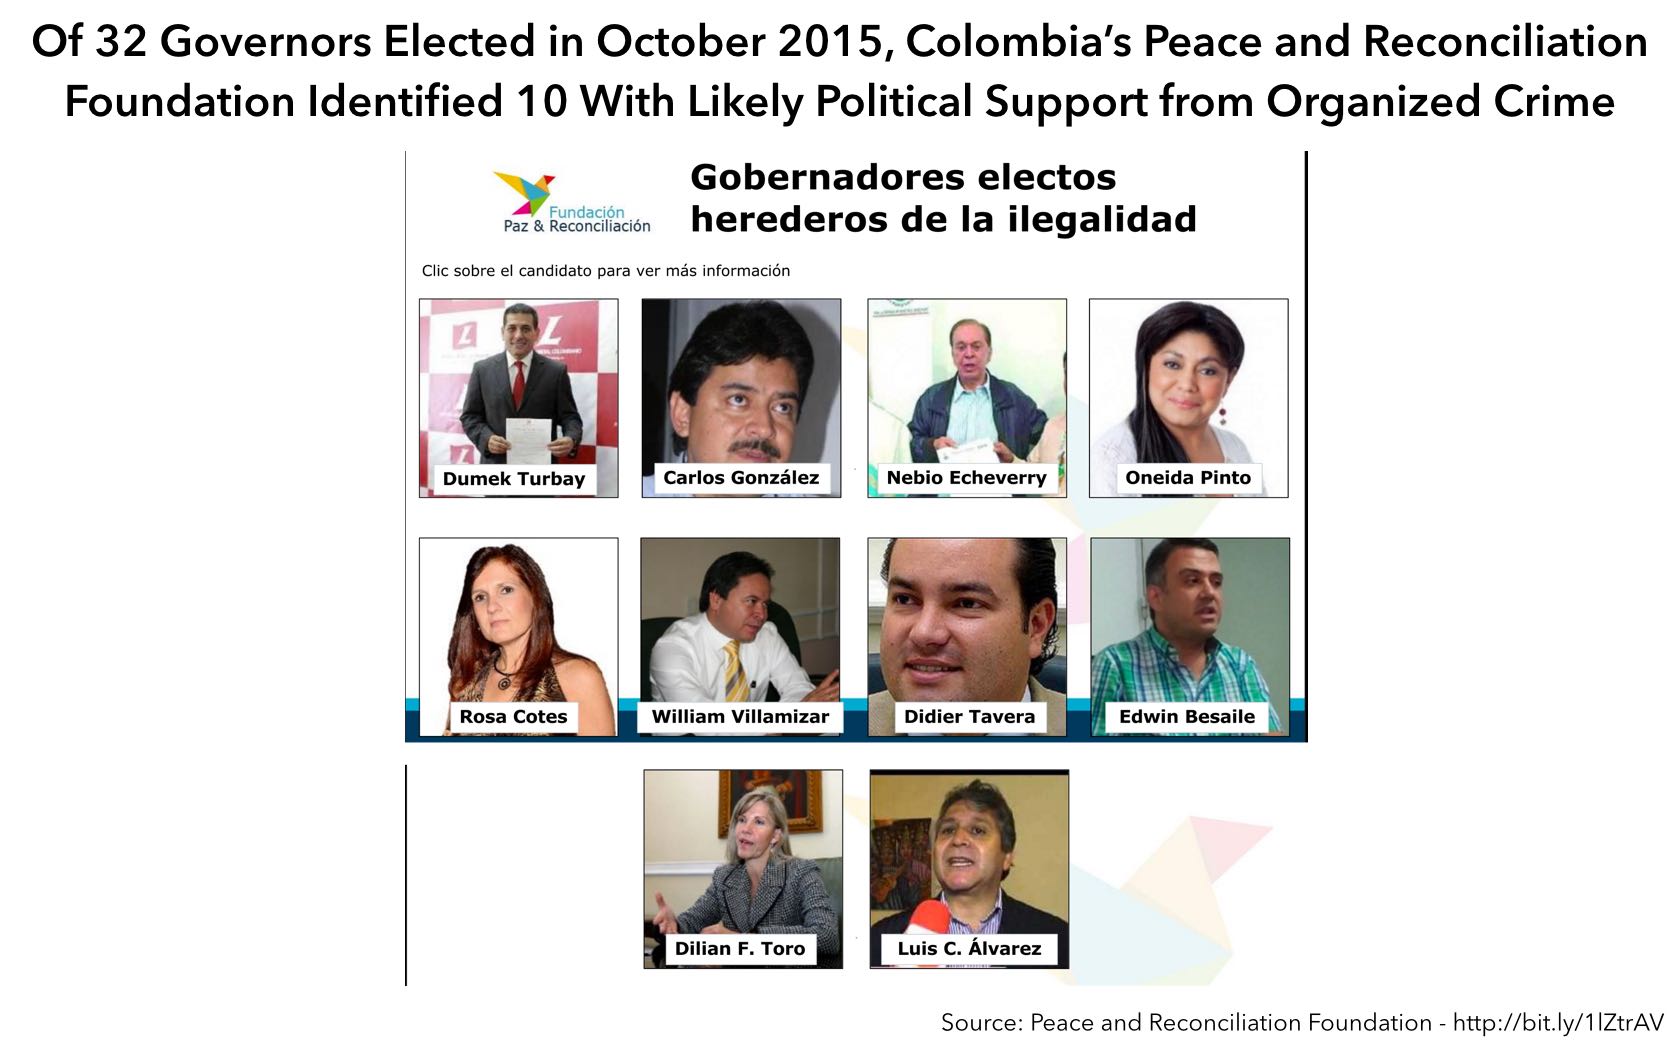 Graphic from the Peace and Reconciliation Foundation identifying 10 recently elected governors with likely organized crime ties